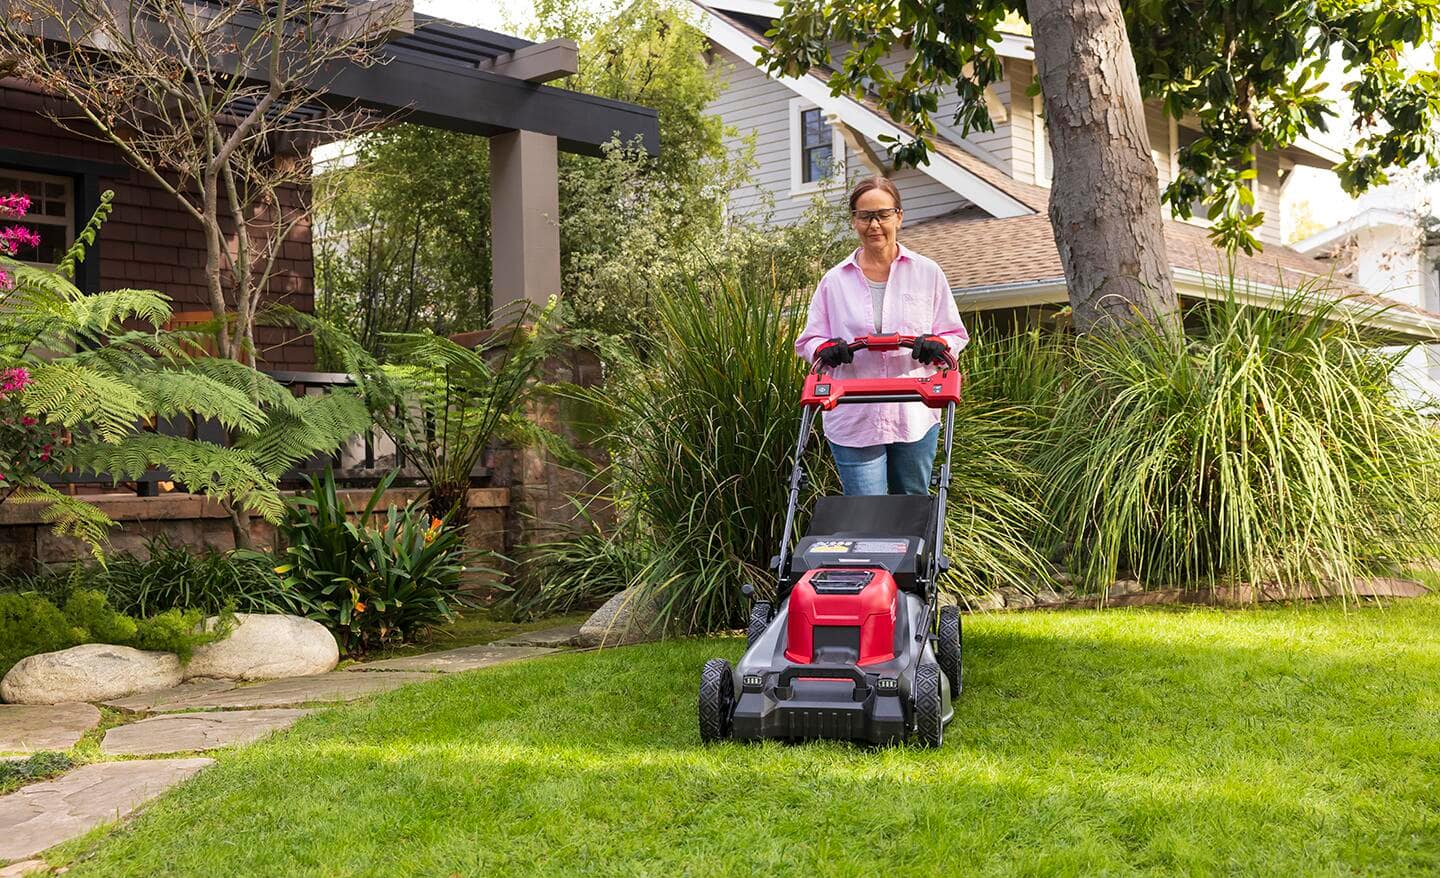 Person pushes a lawnmower in a home landscape